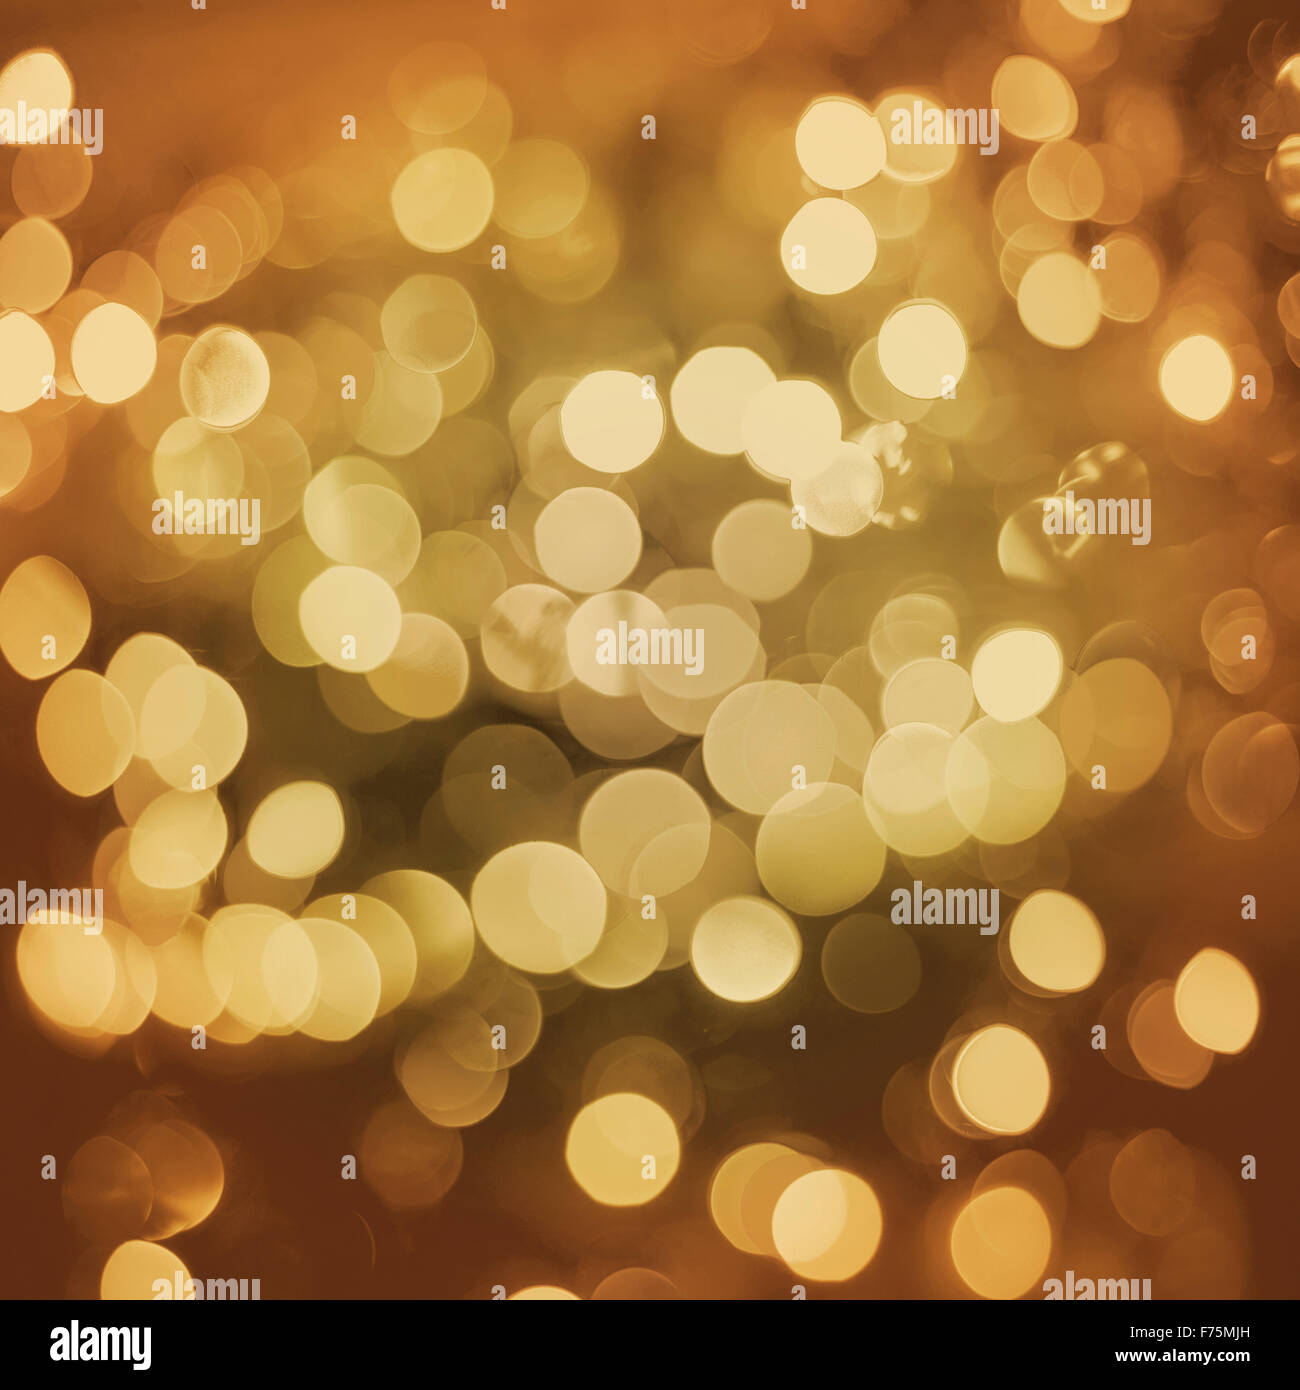 Gold sparkle blur light elegant retro background. Ideal for holiday greeting card, event or party invitation. Stock Photo